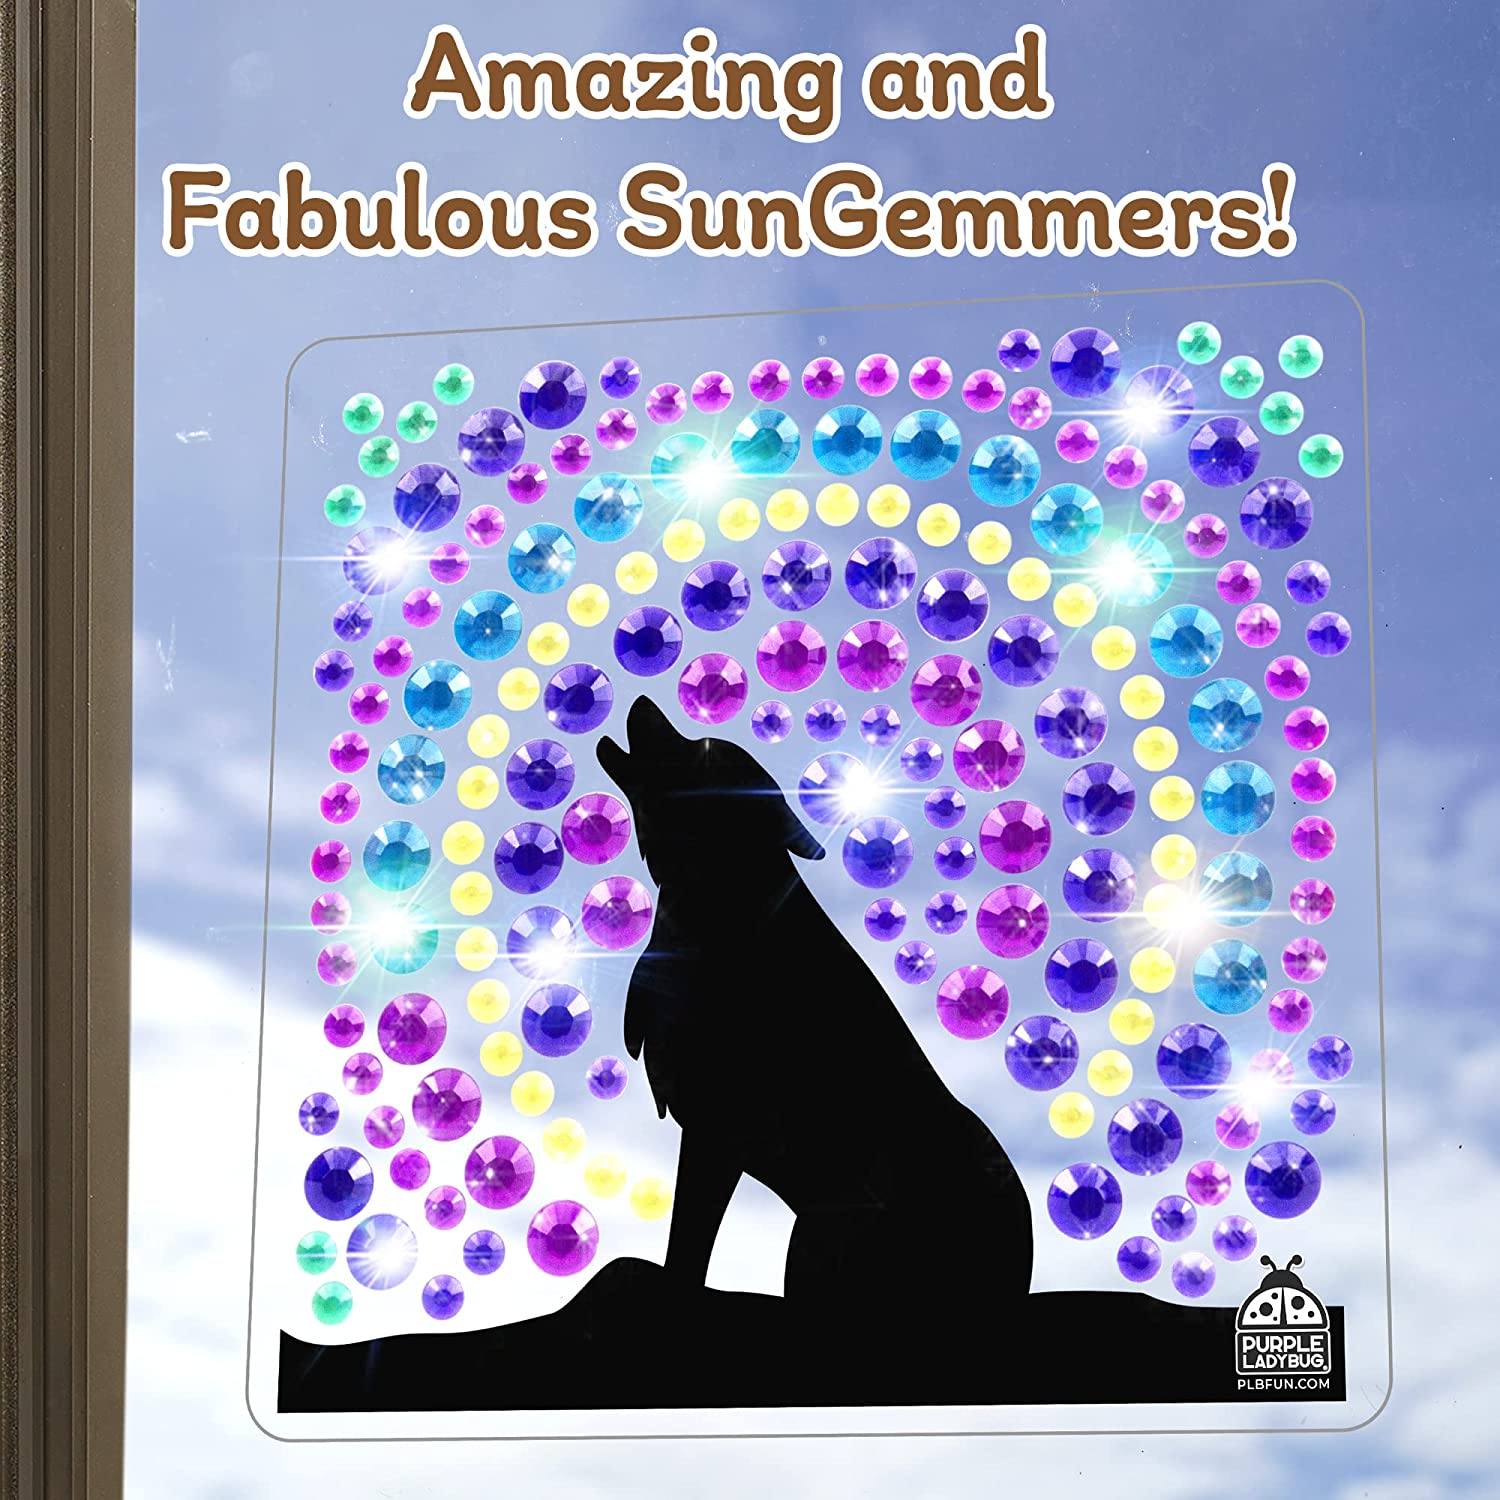 PURPLE LADYBUG SUNGEMMERS Suncatcher Diamond Painting Kit + 7 White Gift  Bags with Scratch Panel for Personalized Messages